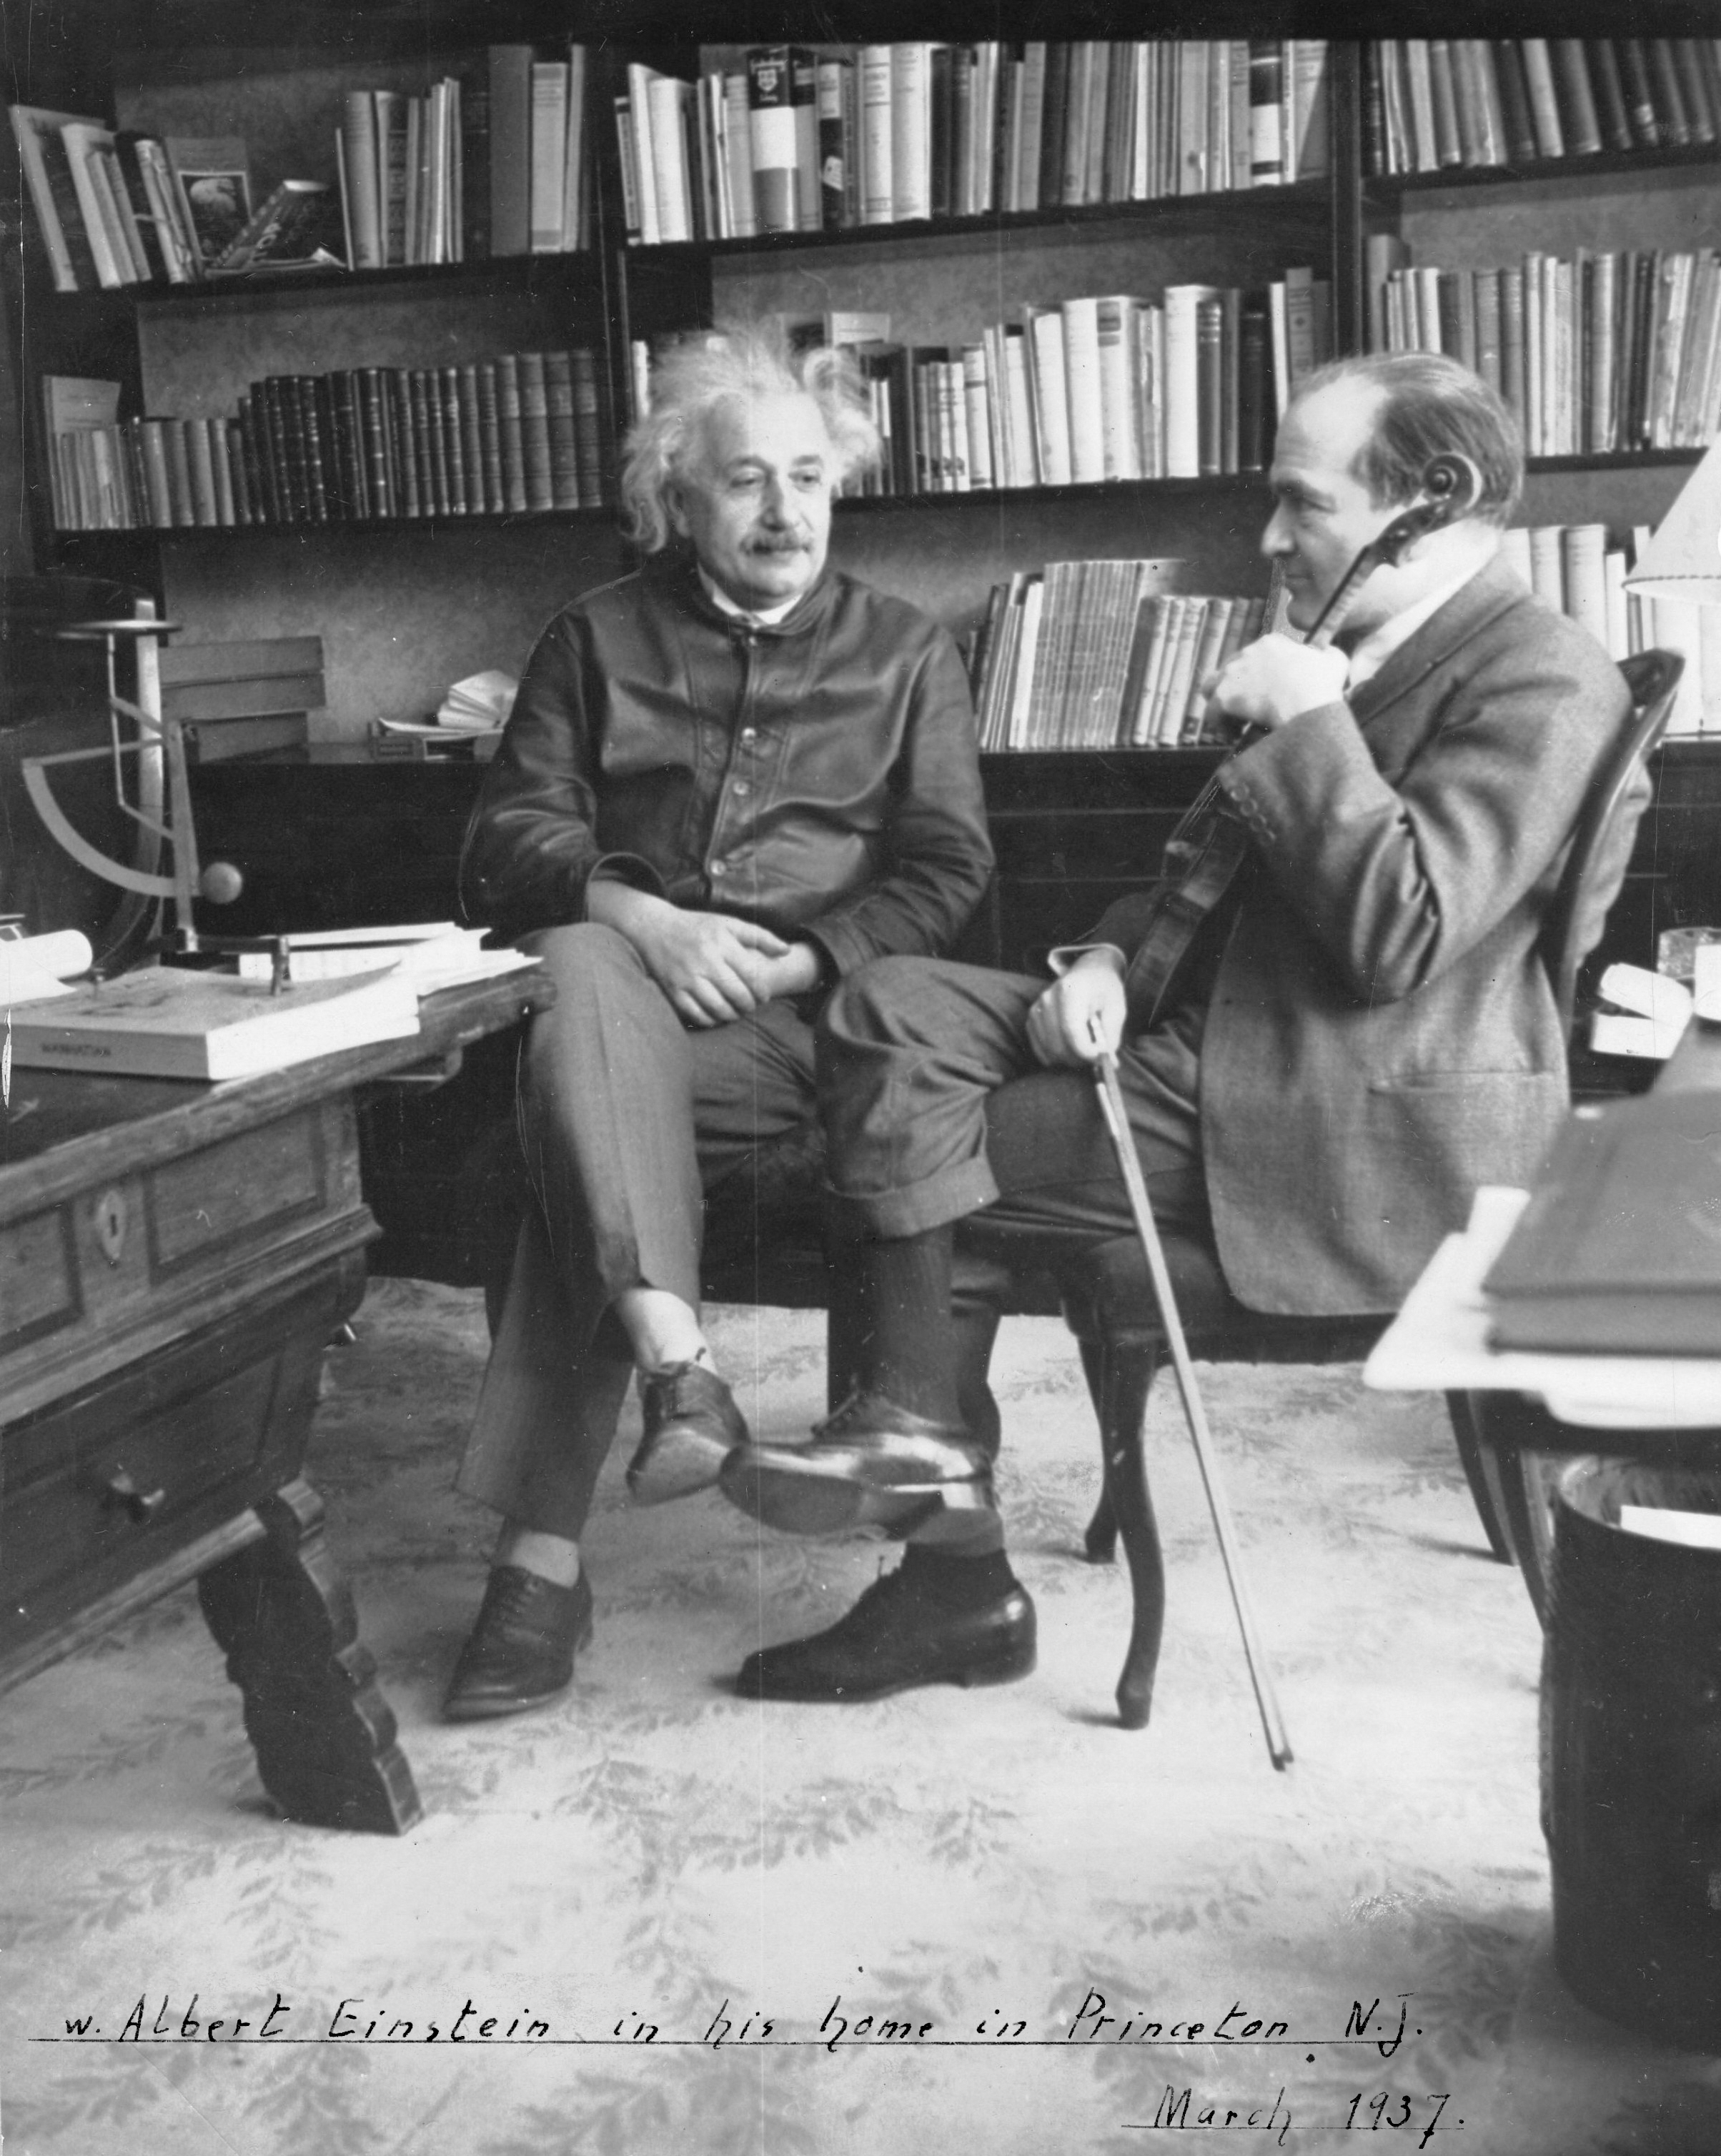 Two men sitting in a room with books.